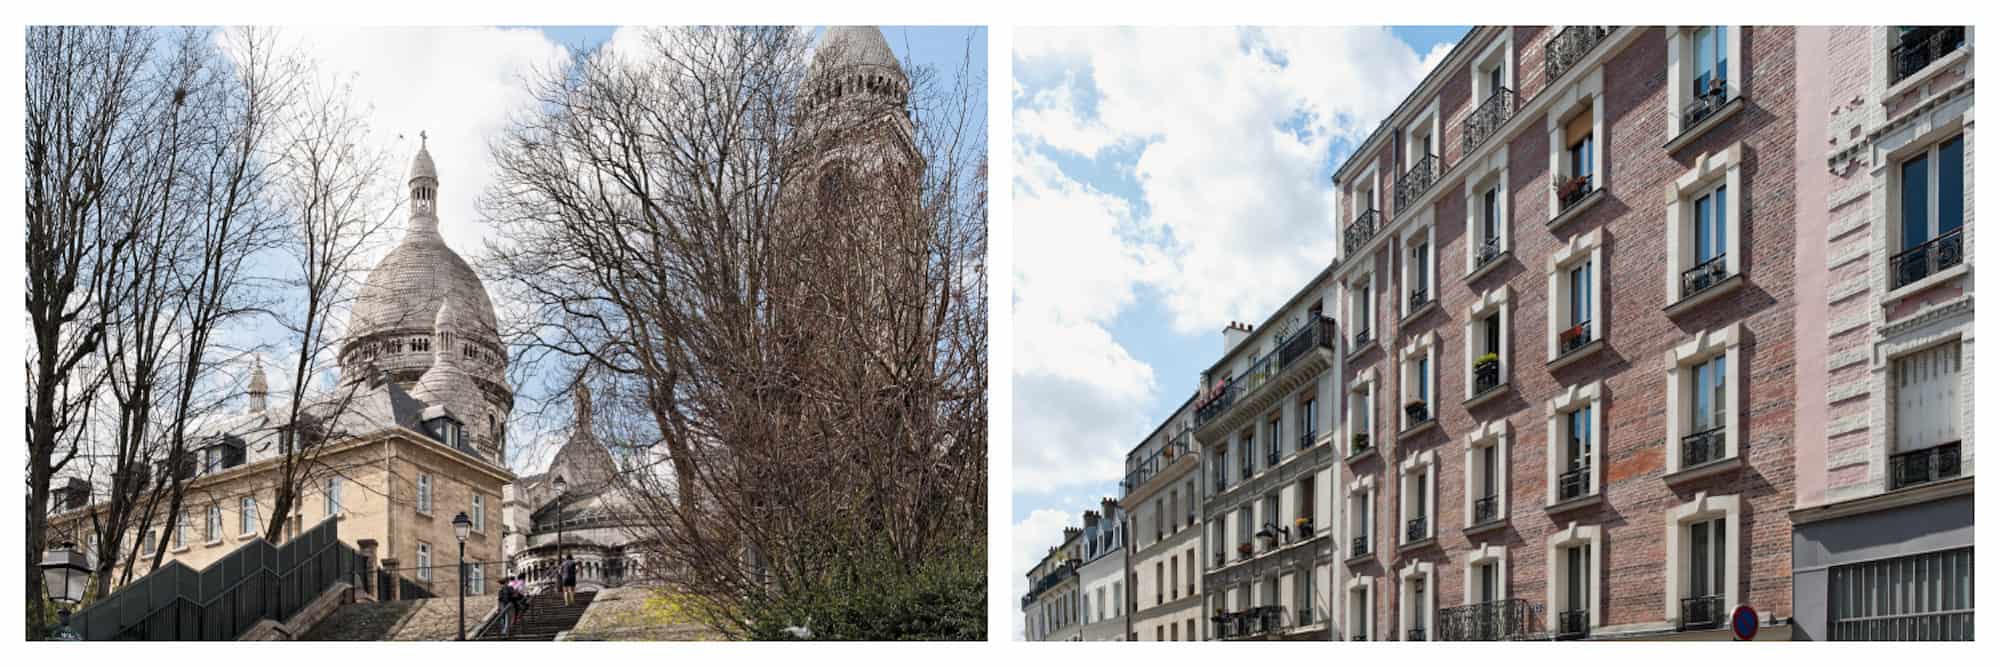 A view of the Sacré Coeur Basilica through bare trees in the winter in Paris (left). A row of apartment buildings that line a street in Paris (right).